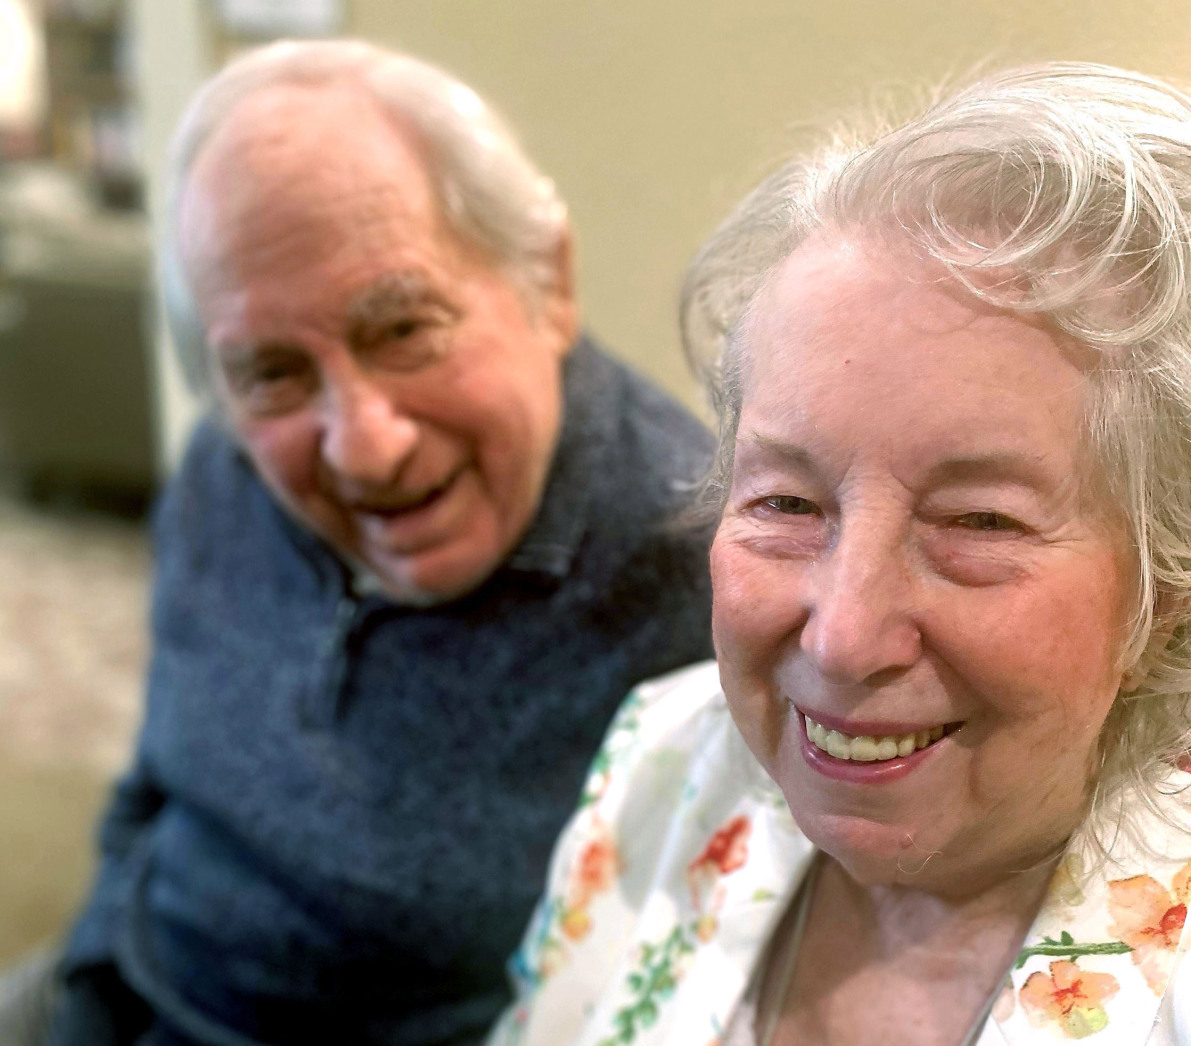 Fritz and Marjorie Buell, The elderly couple smiling.